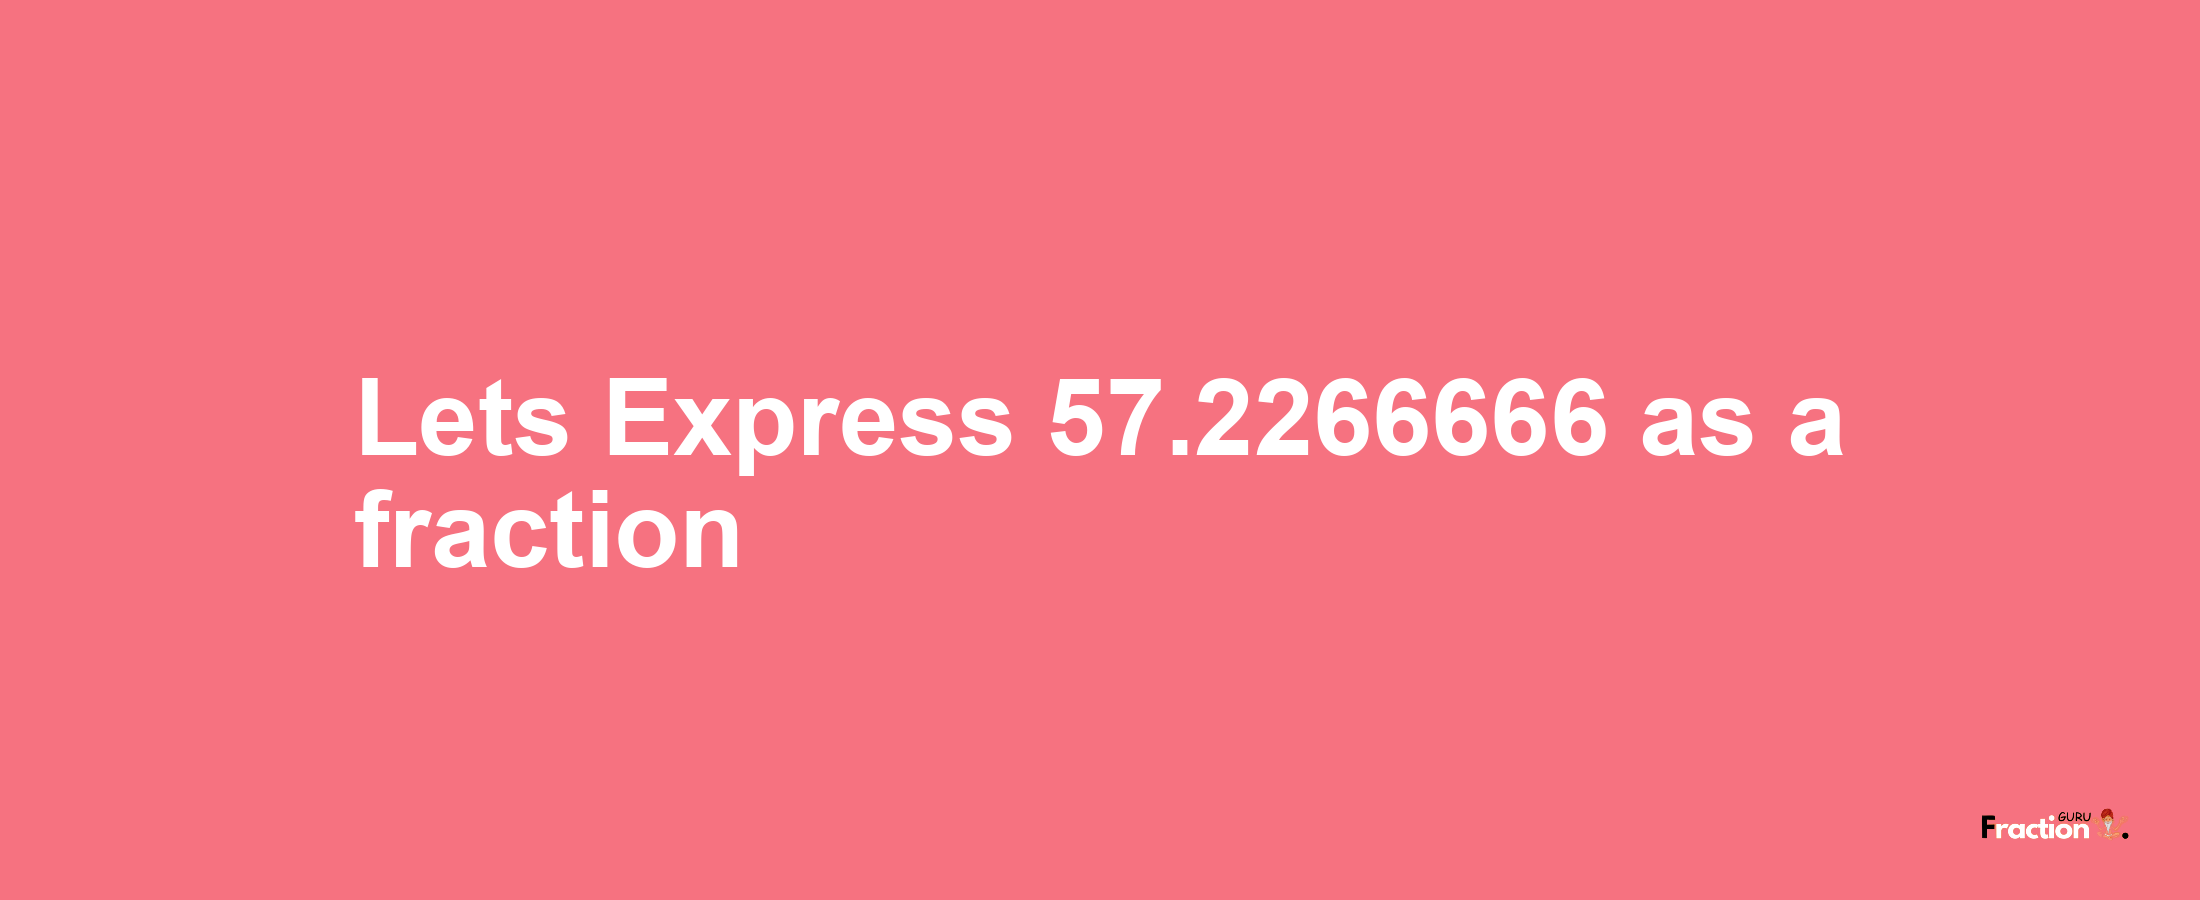 Lets Express 57.2266666 as afraction